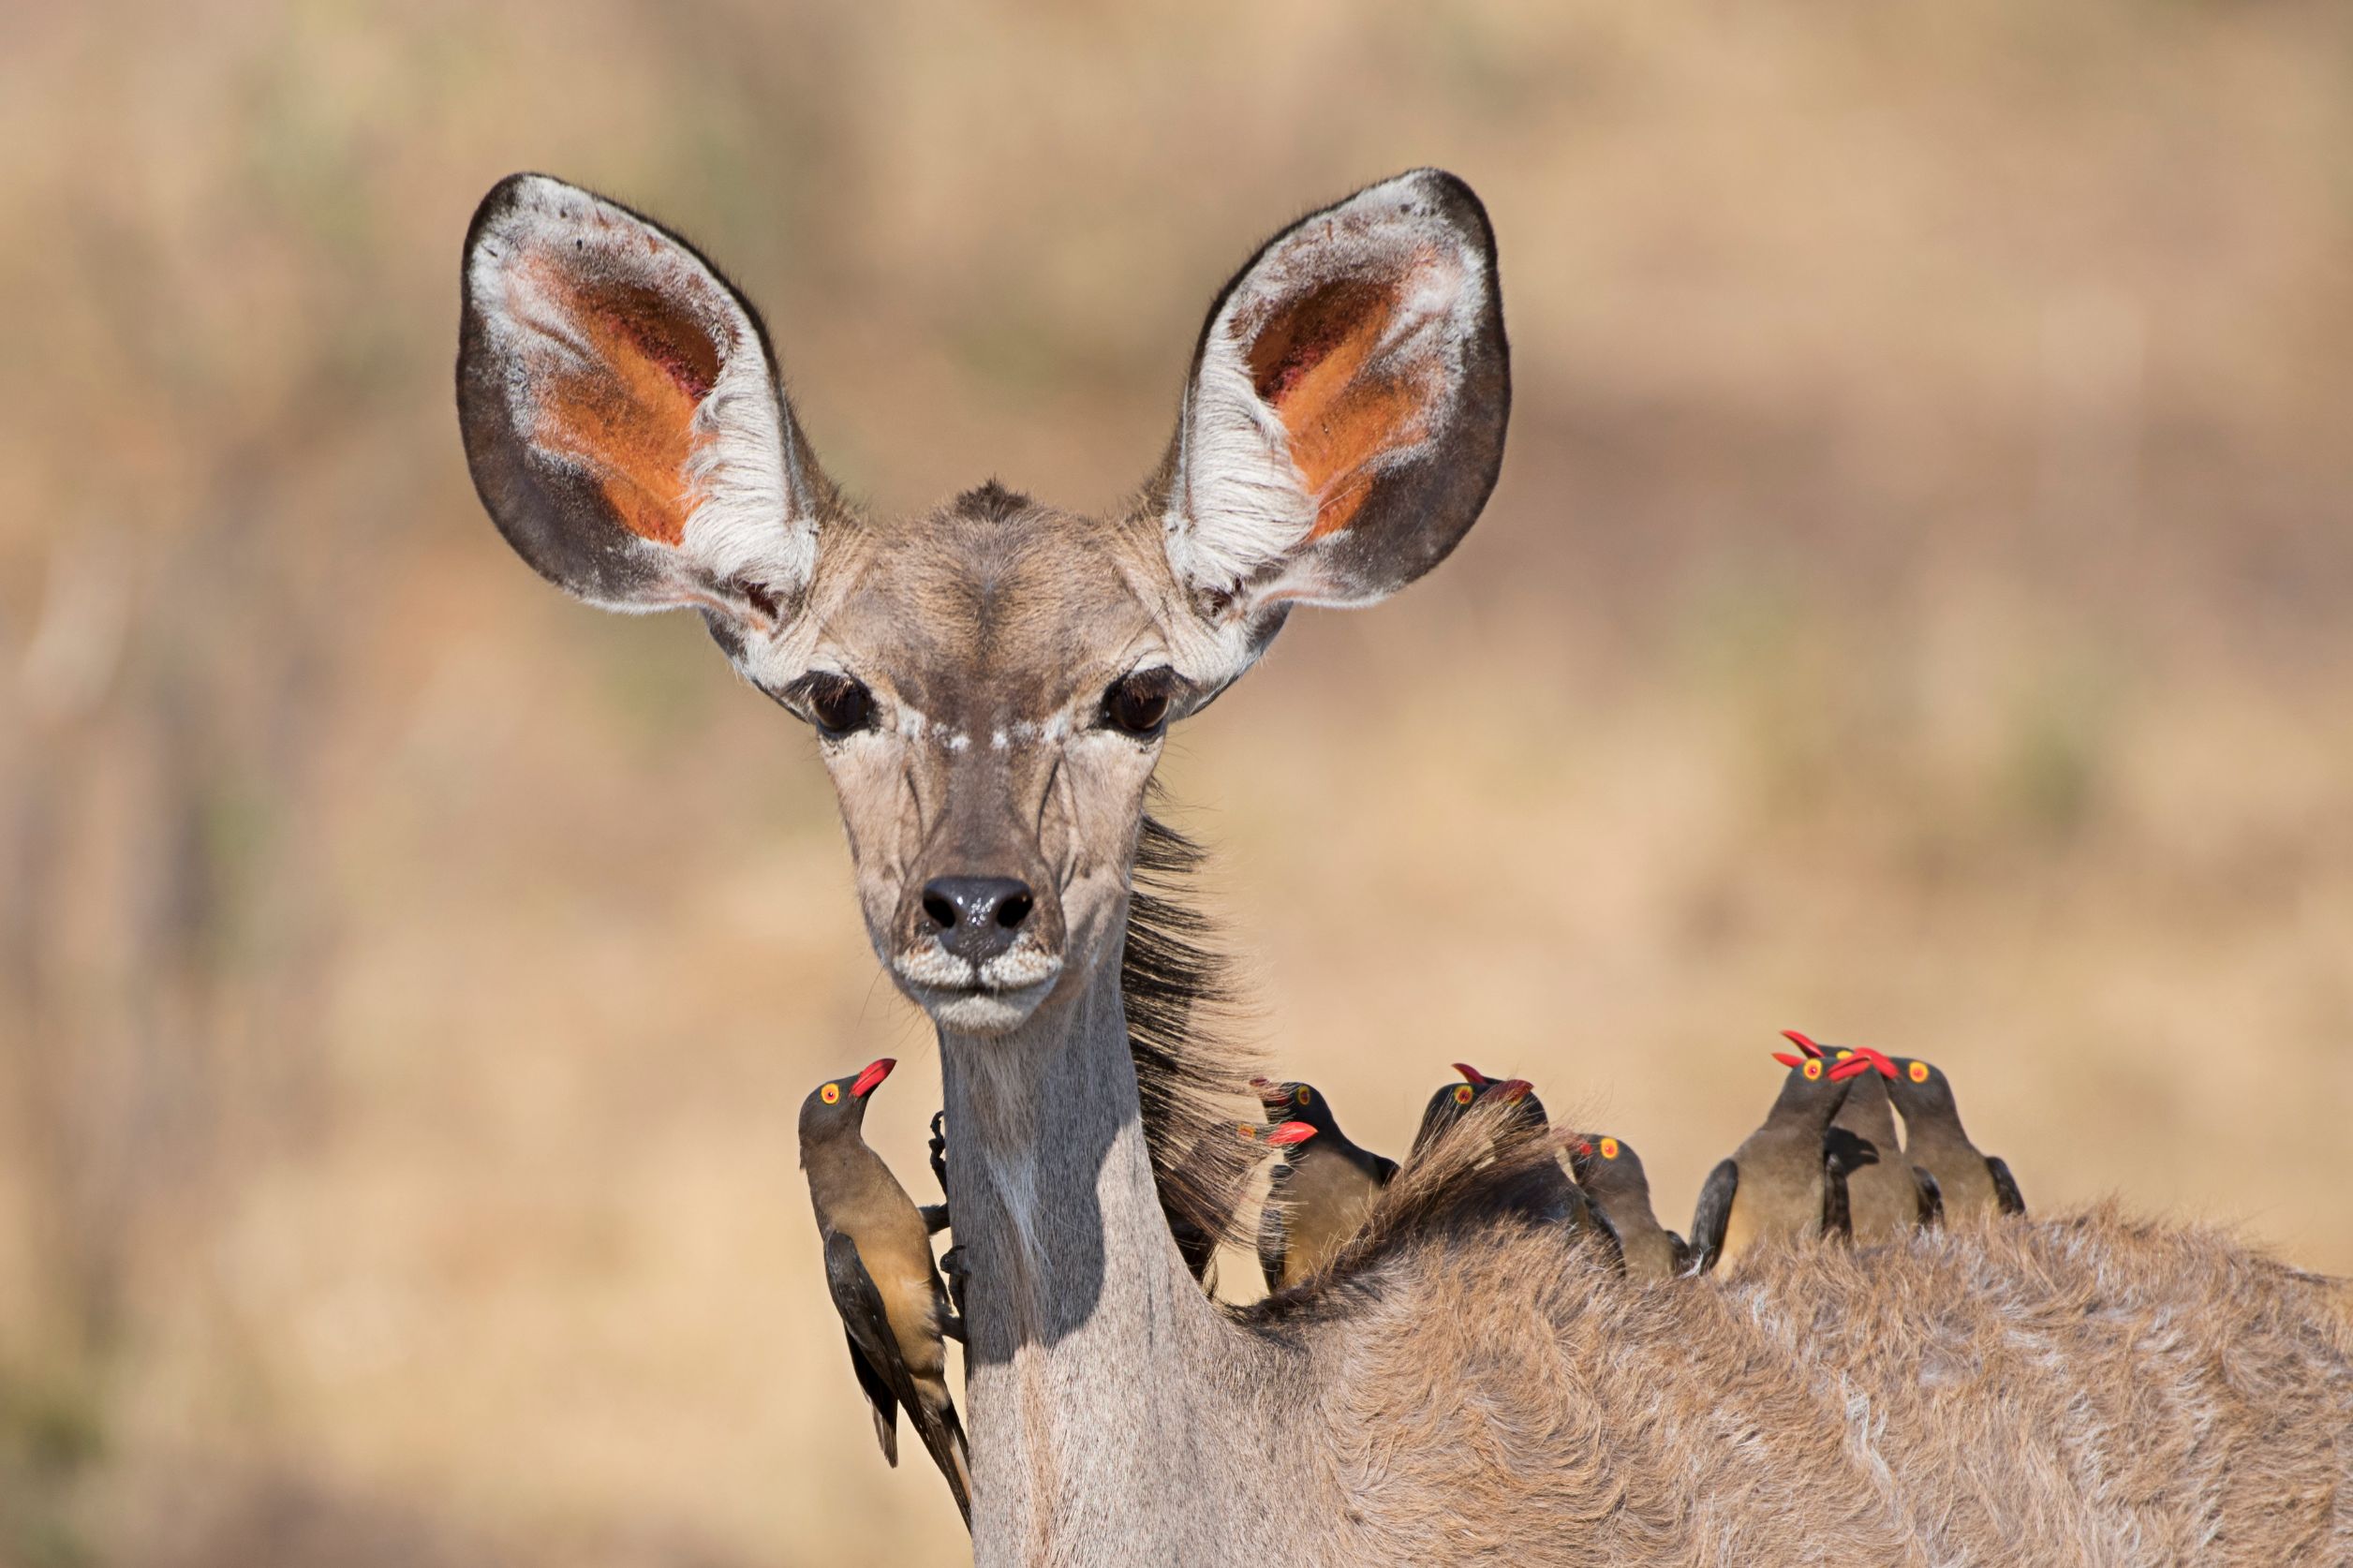 A Female of Kudu carrying a group of 10 Oxpeckers in Caprivi Area. Photo: Getty Images